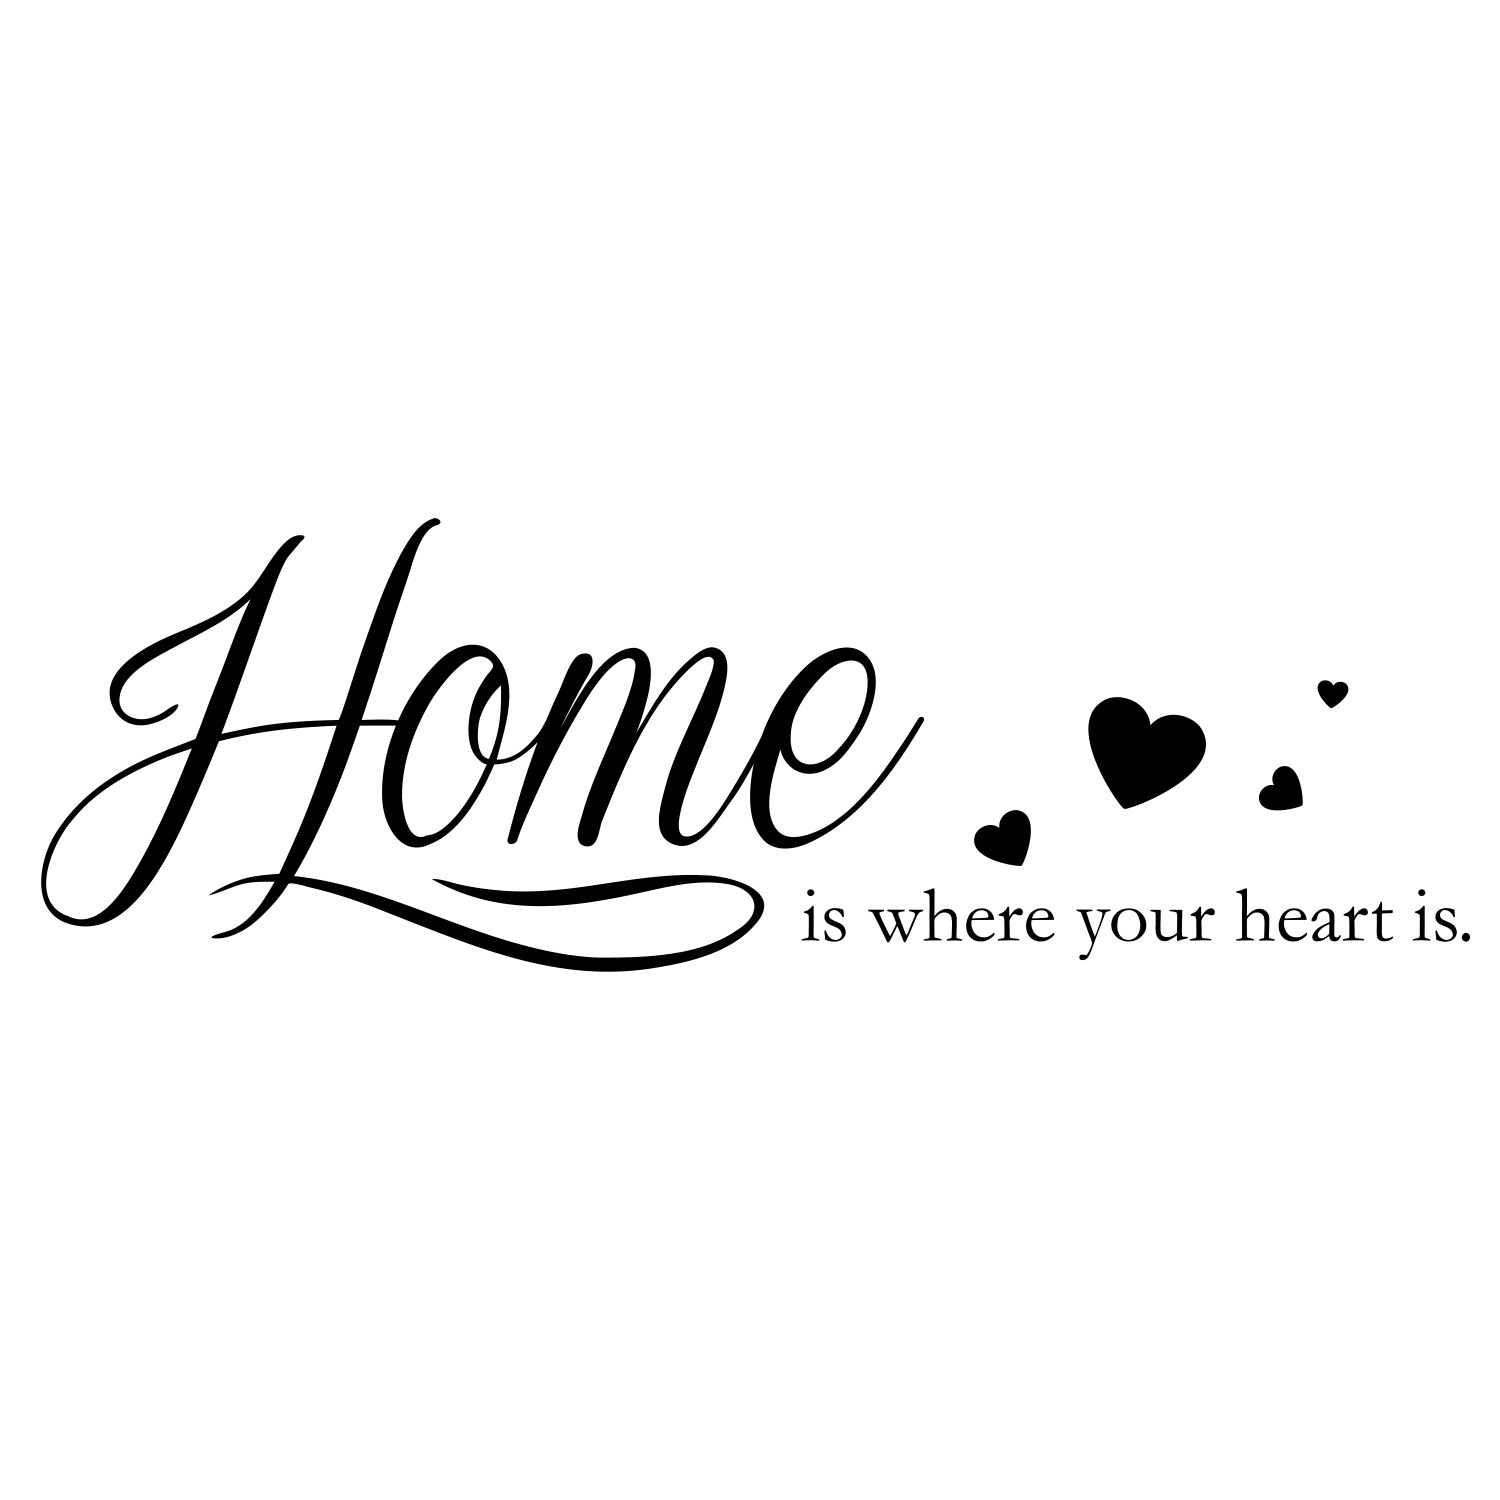 queence Wandtattoo heart »Home your is kaufen is«, 30 120 BAUR | cm x where